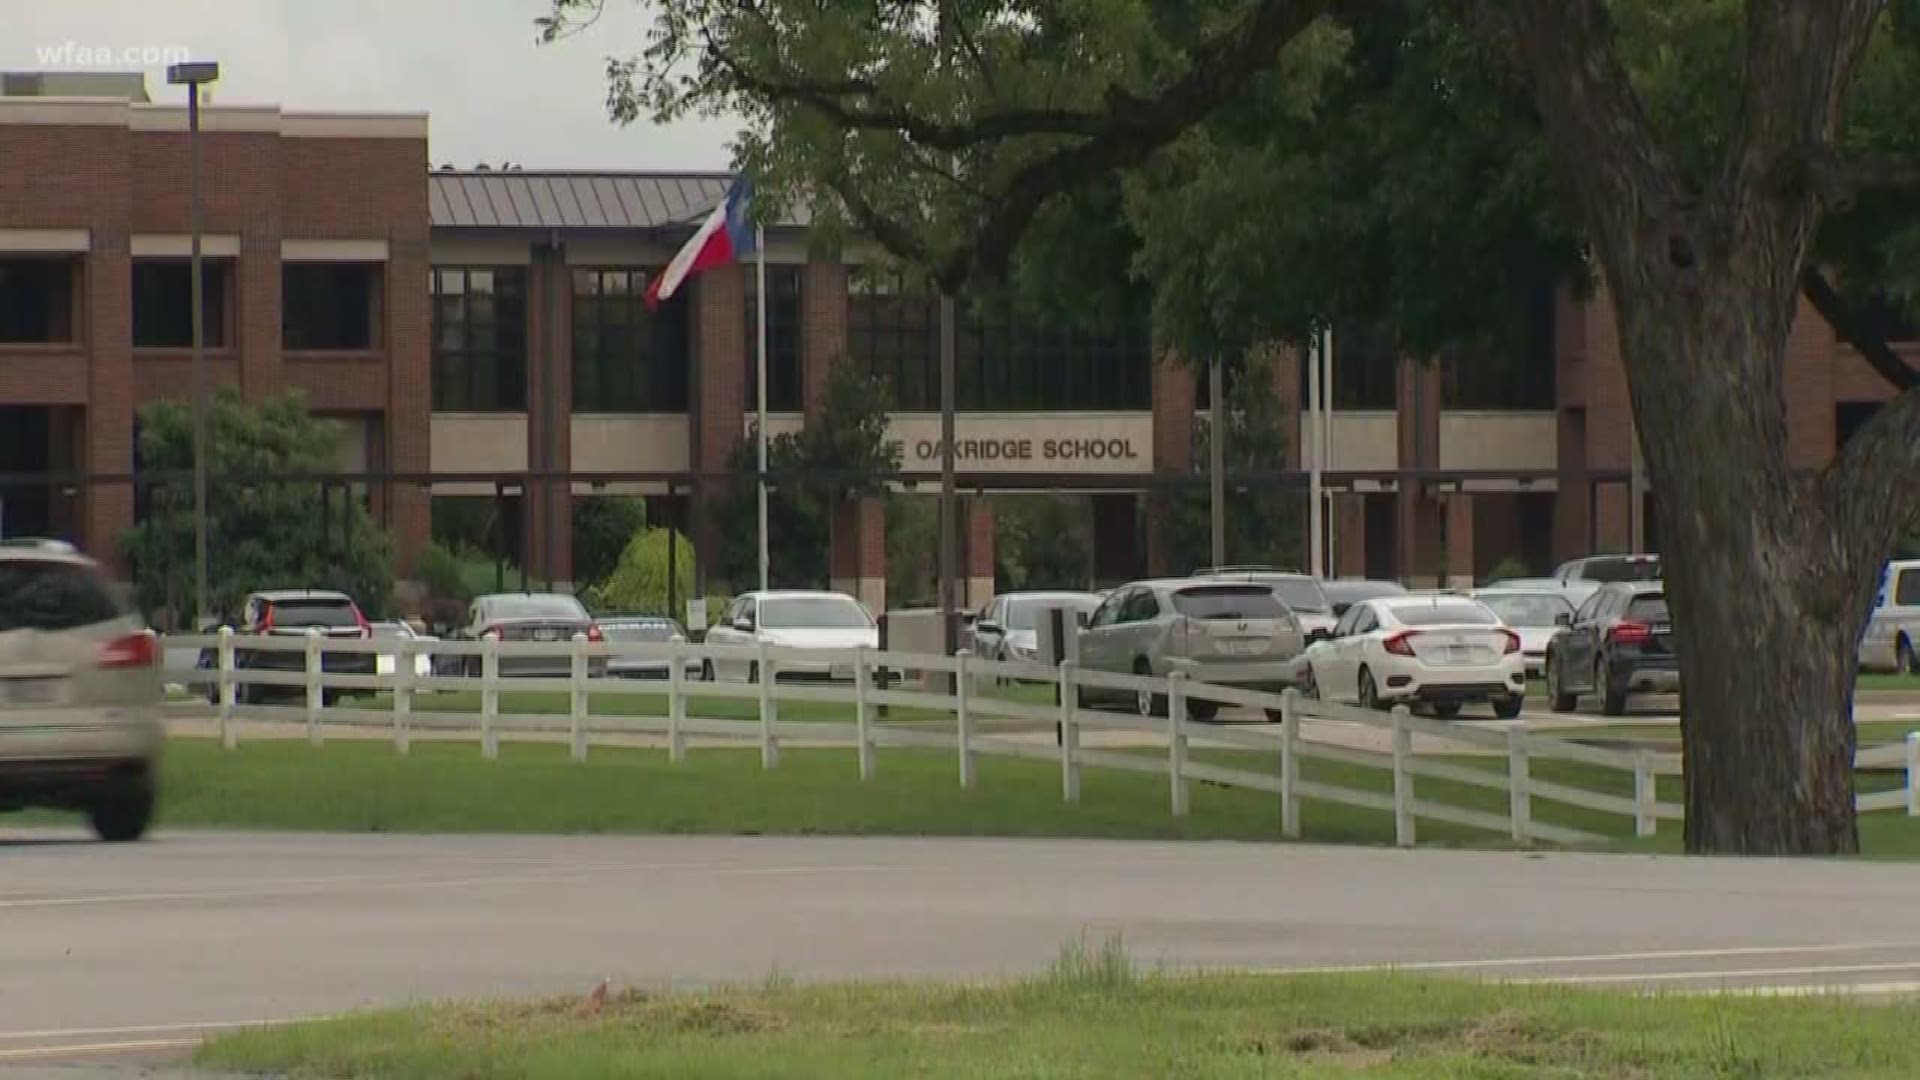 School official's private message goes public